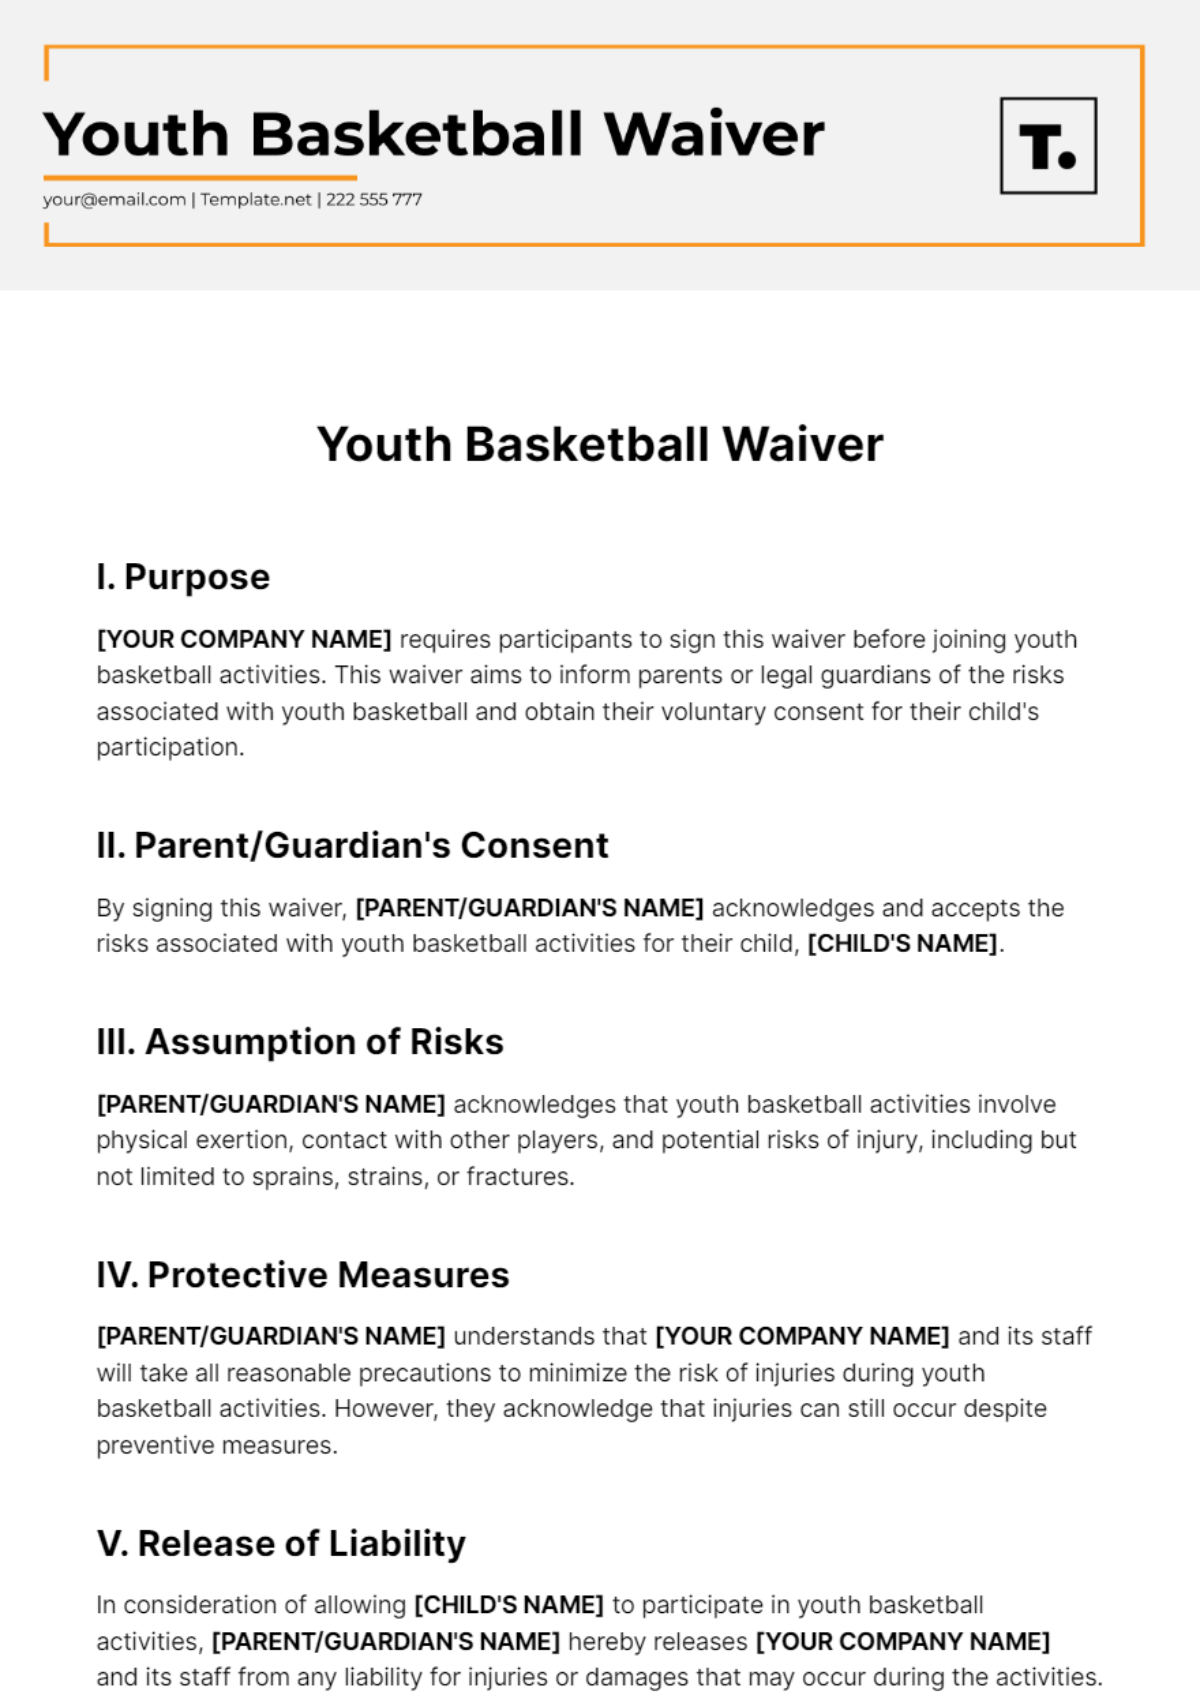 Youth Basketball Waiver Template